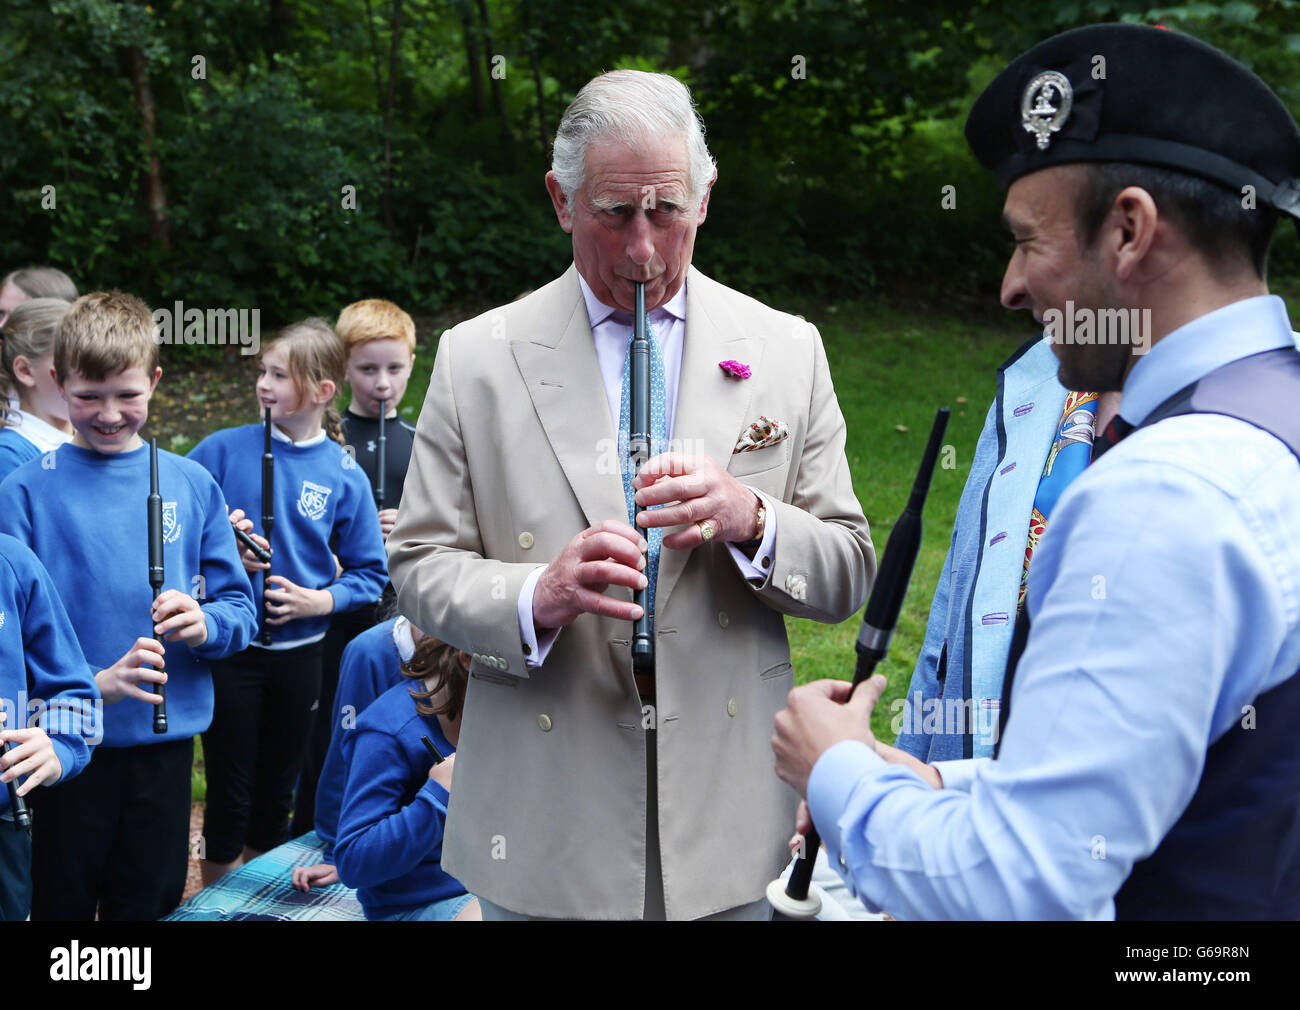 The Prince of Wales, known as the Duke of Rothesay while in Scotland, plays a chanter as he takes part in chanter lesson with local school children taught by Alisdair McLaren during his visit to the National Piping Centre at the Dumfries House Estate in Cumnock as it holds a 'Come and Try' workshop. Stock Photo